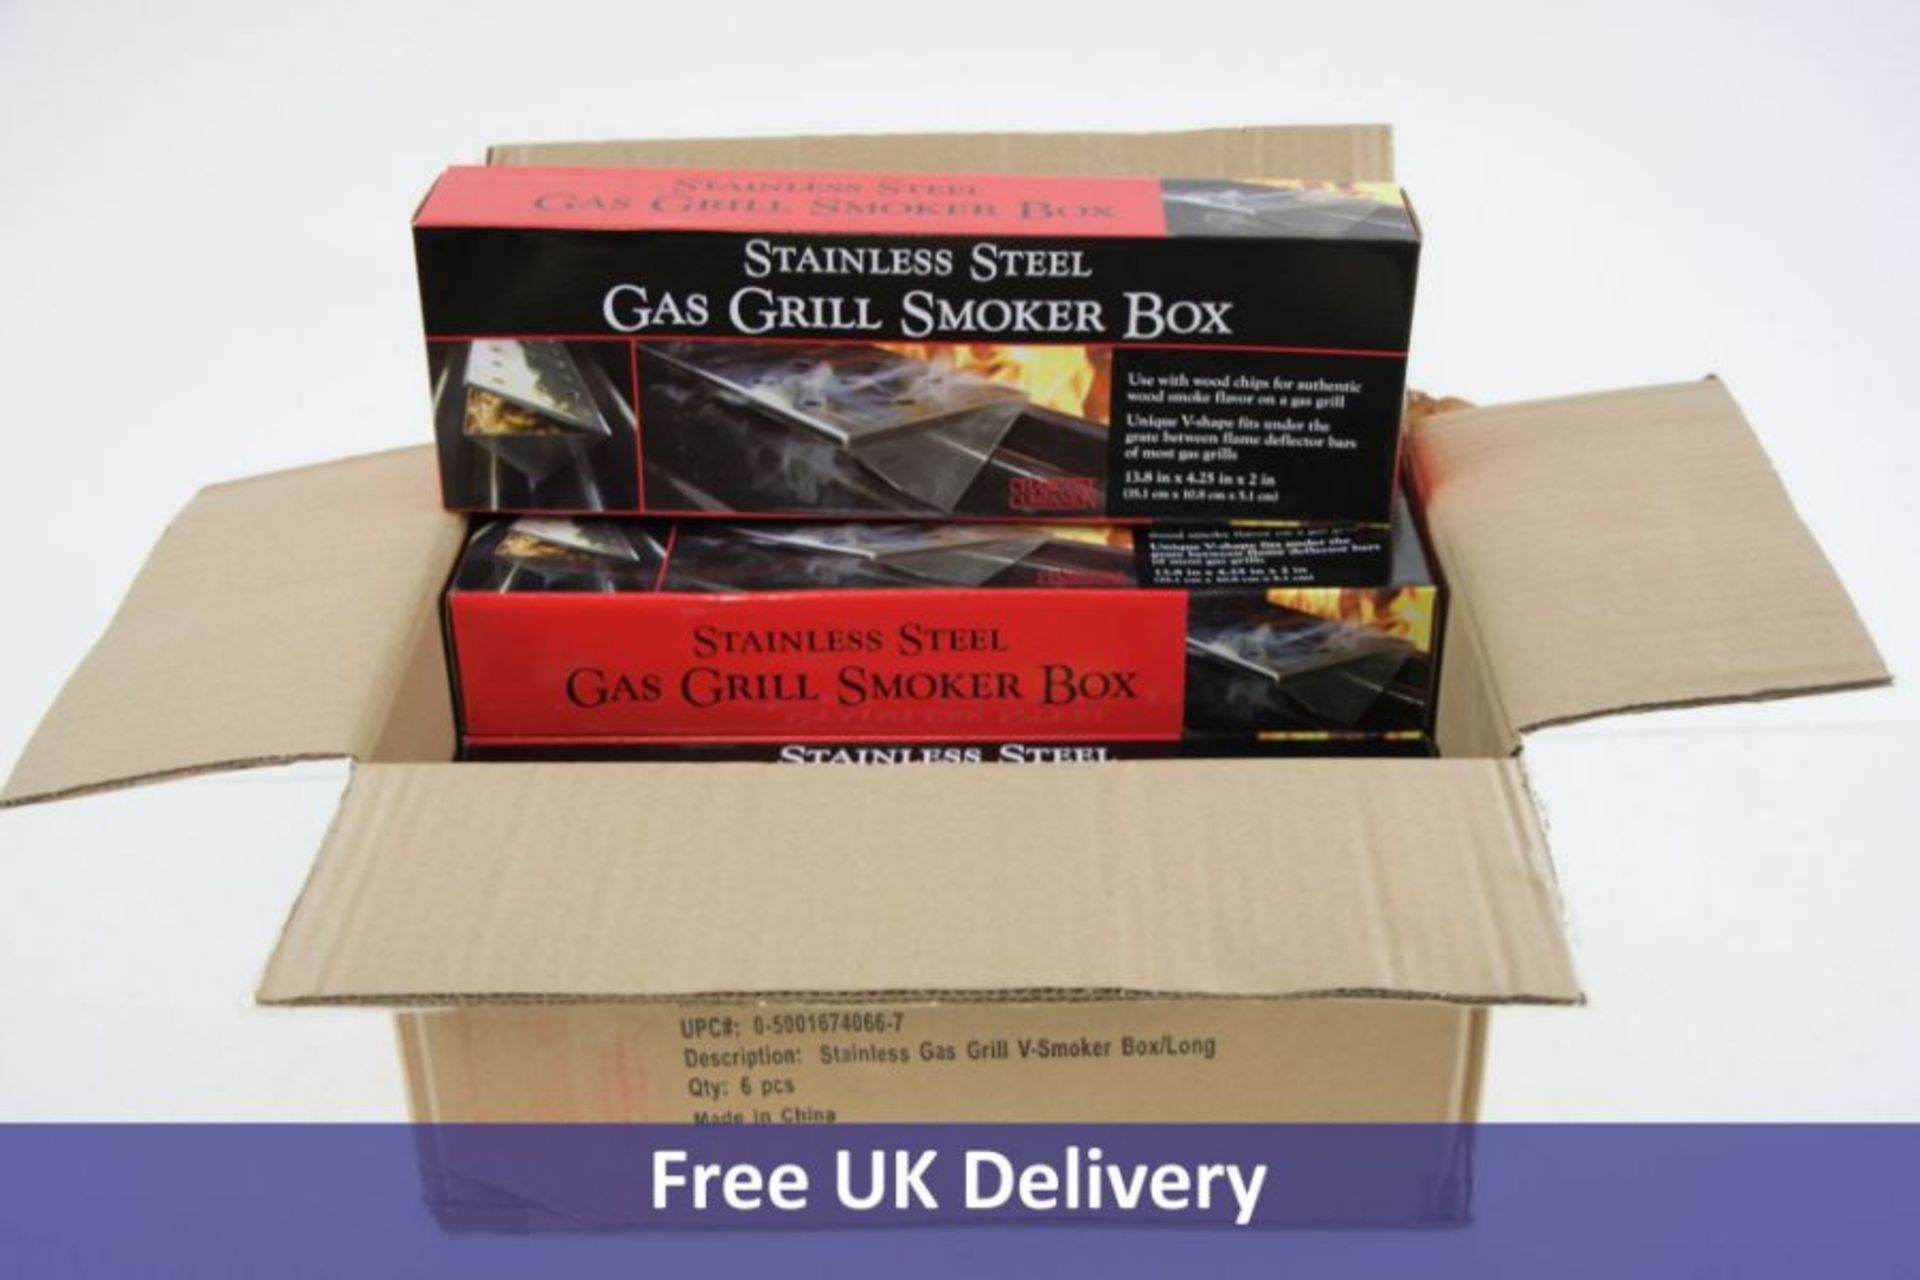 Six Stainless Steel Gas Grill Smoker Boxes for Bbqs